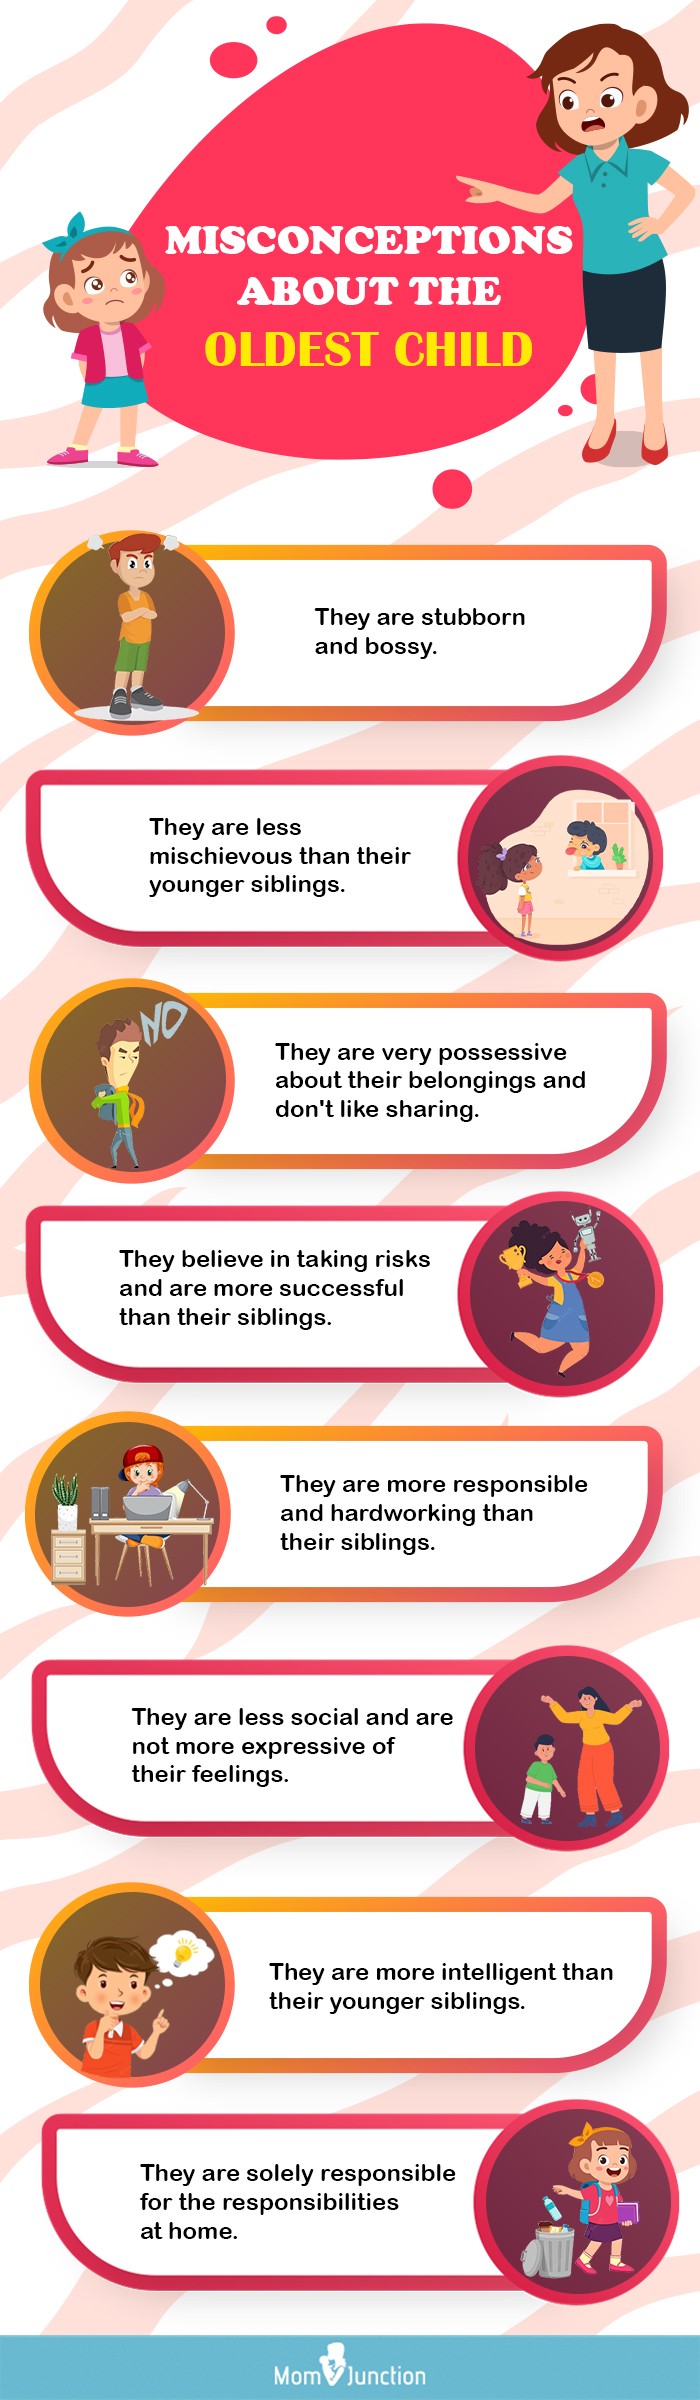 misconceptions about the oldest child [infographic]